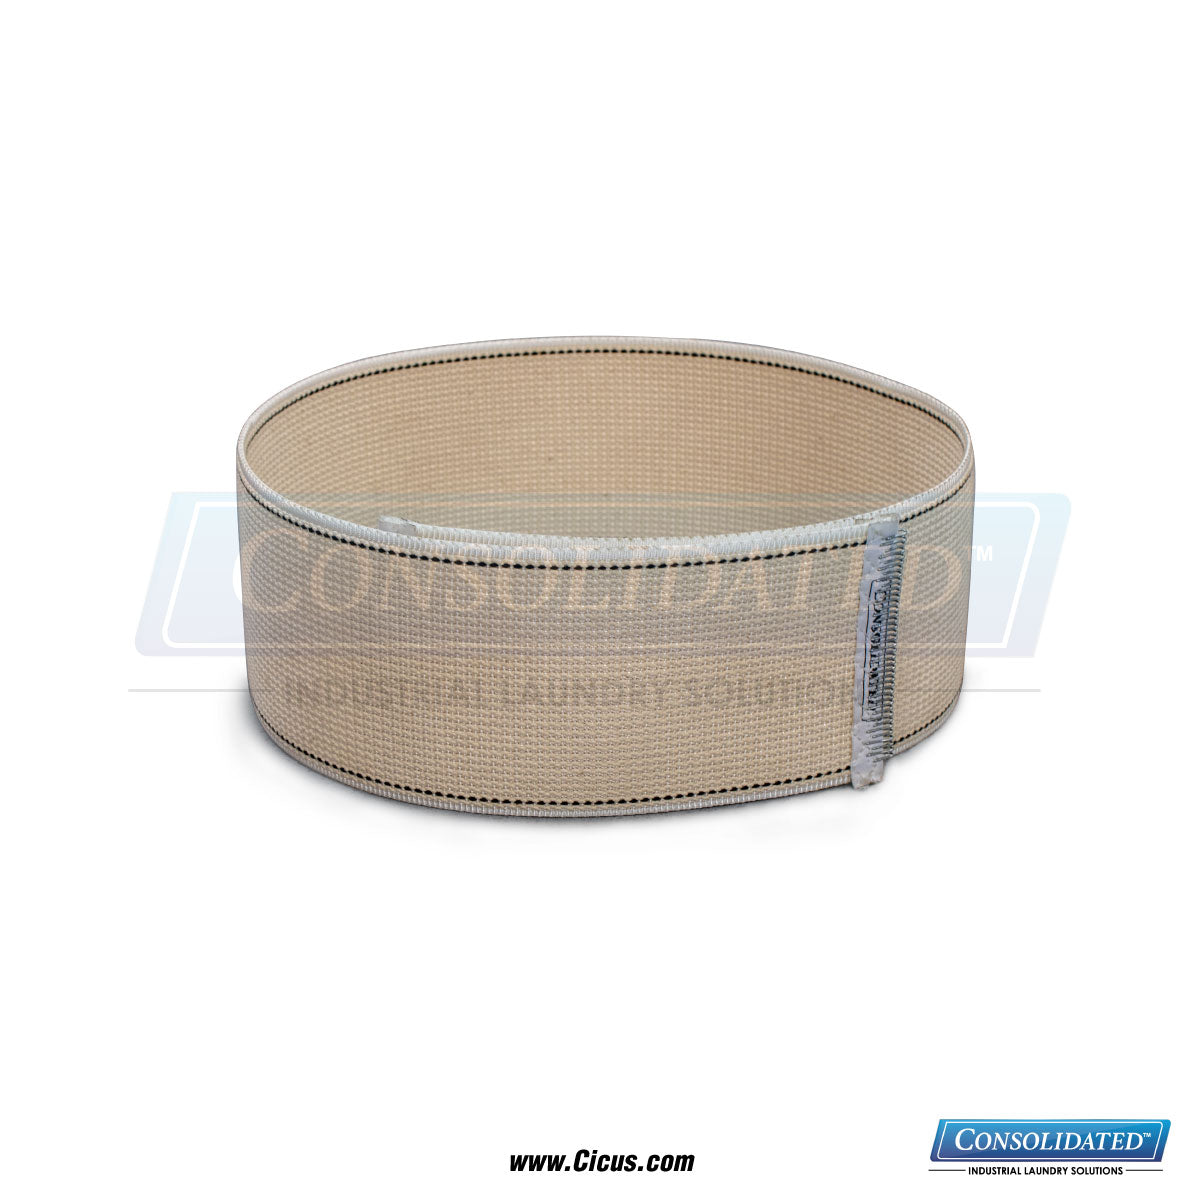 CIC Exclusive Chicago Dryer Canvas Ribbon - 1" x 85" (1001-102)